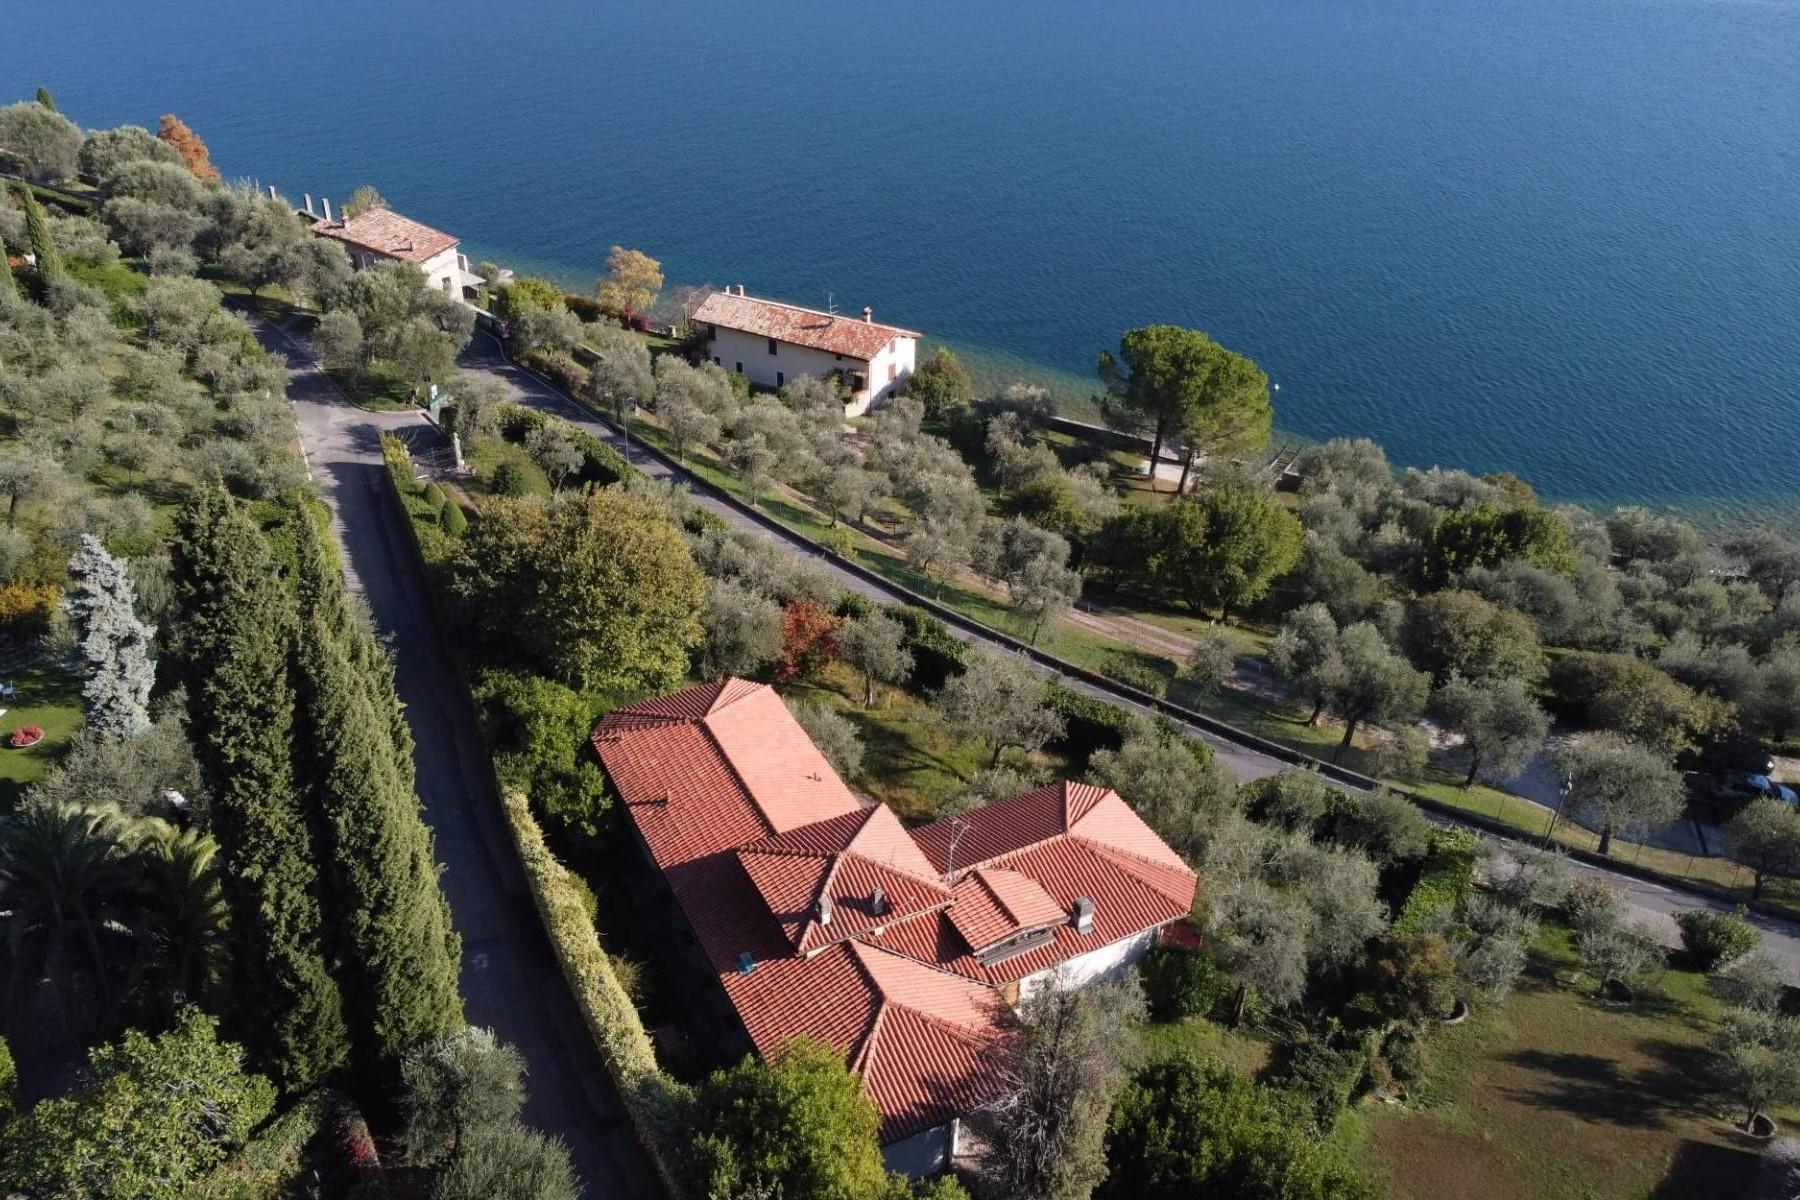 Villa with lake view in Gargnano surrounded by olive trees - 1